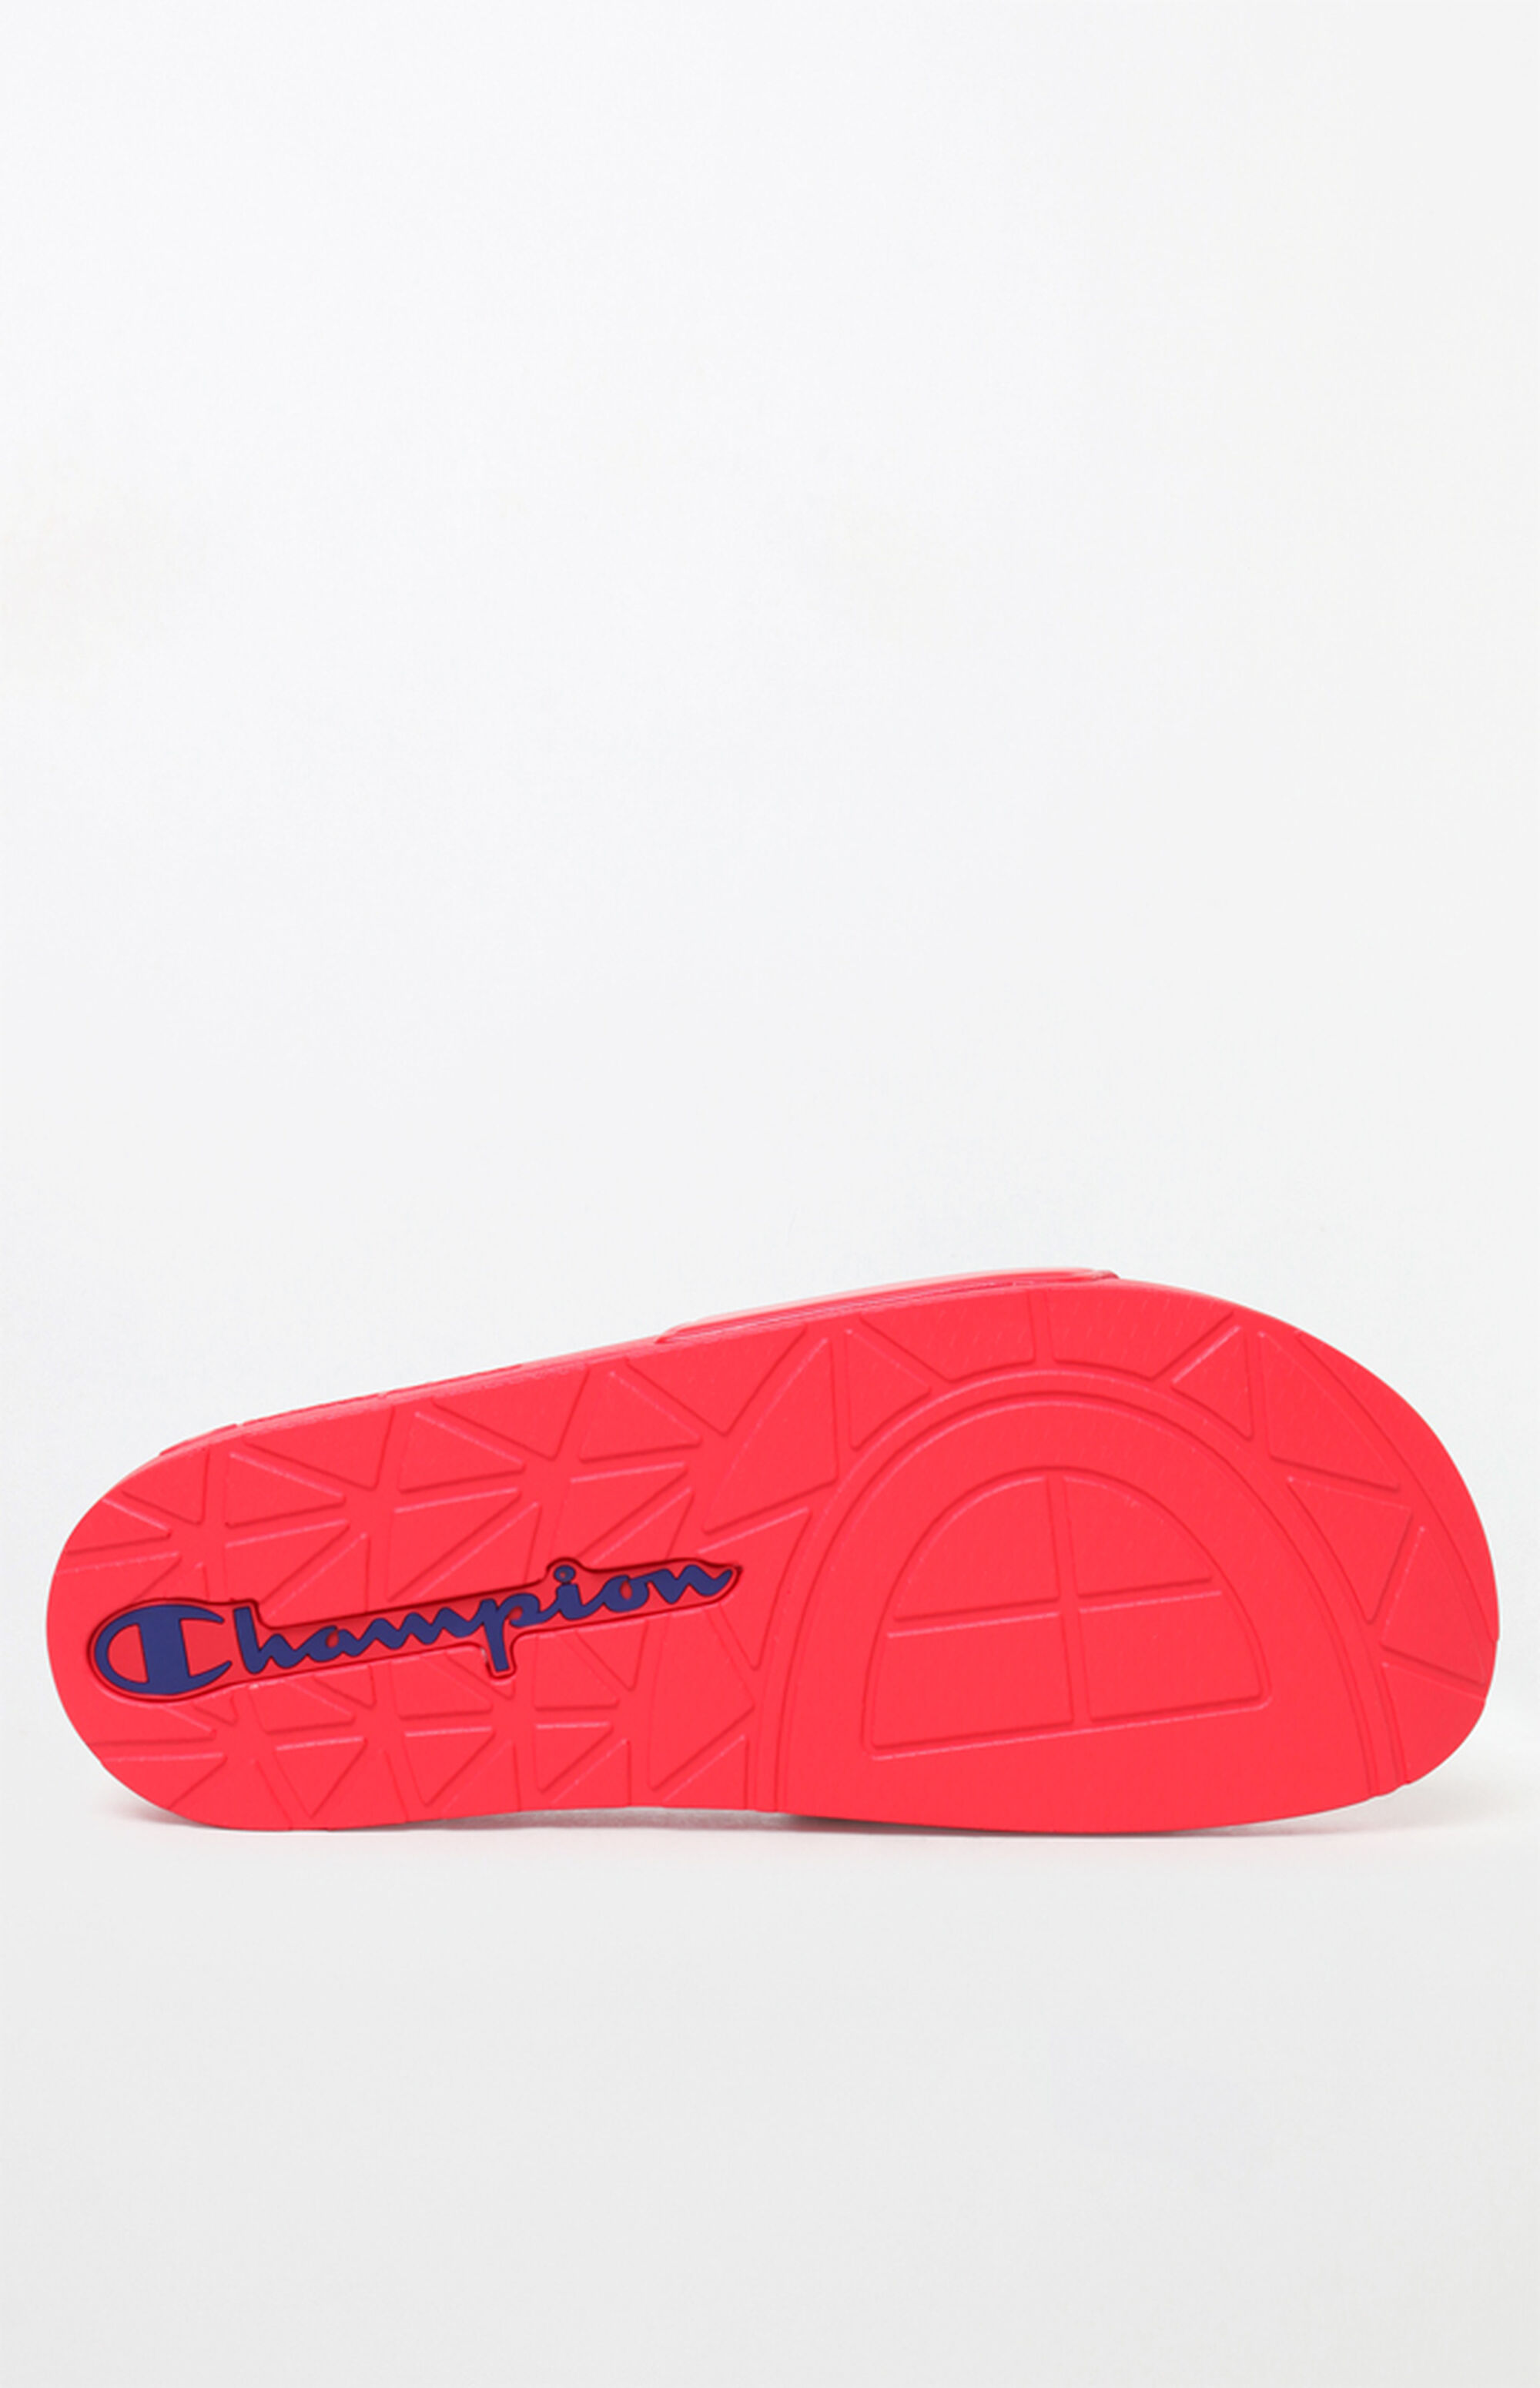 Champion Red IPO Slide Sandals | PacSun